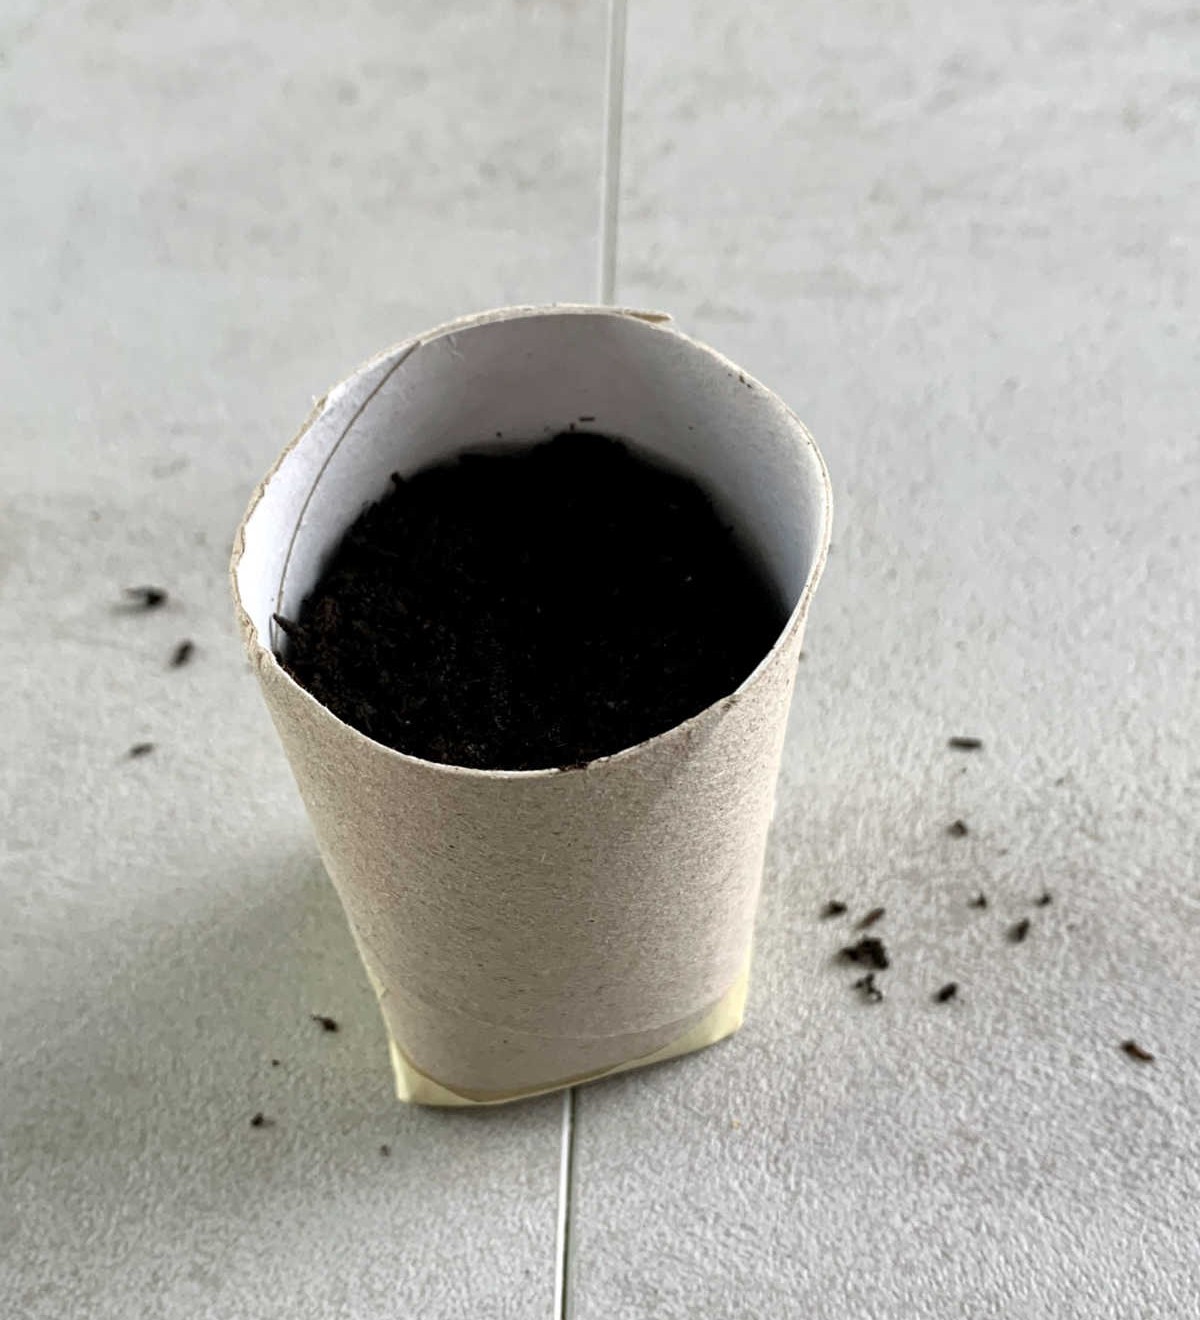 Use Toilet Paper Roll to Plant Seedlings